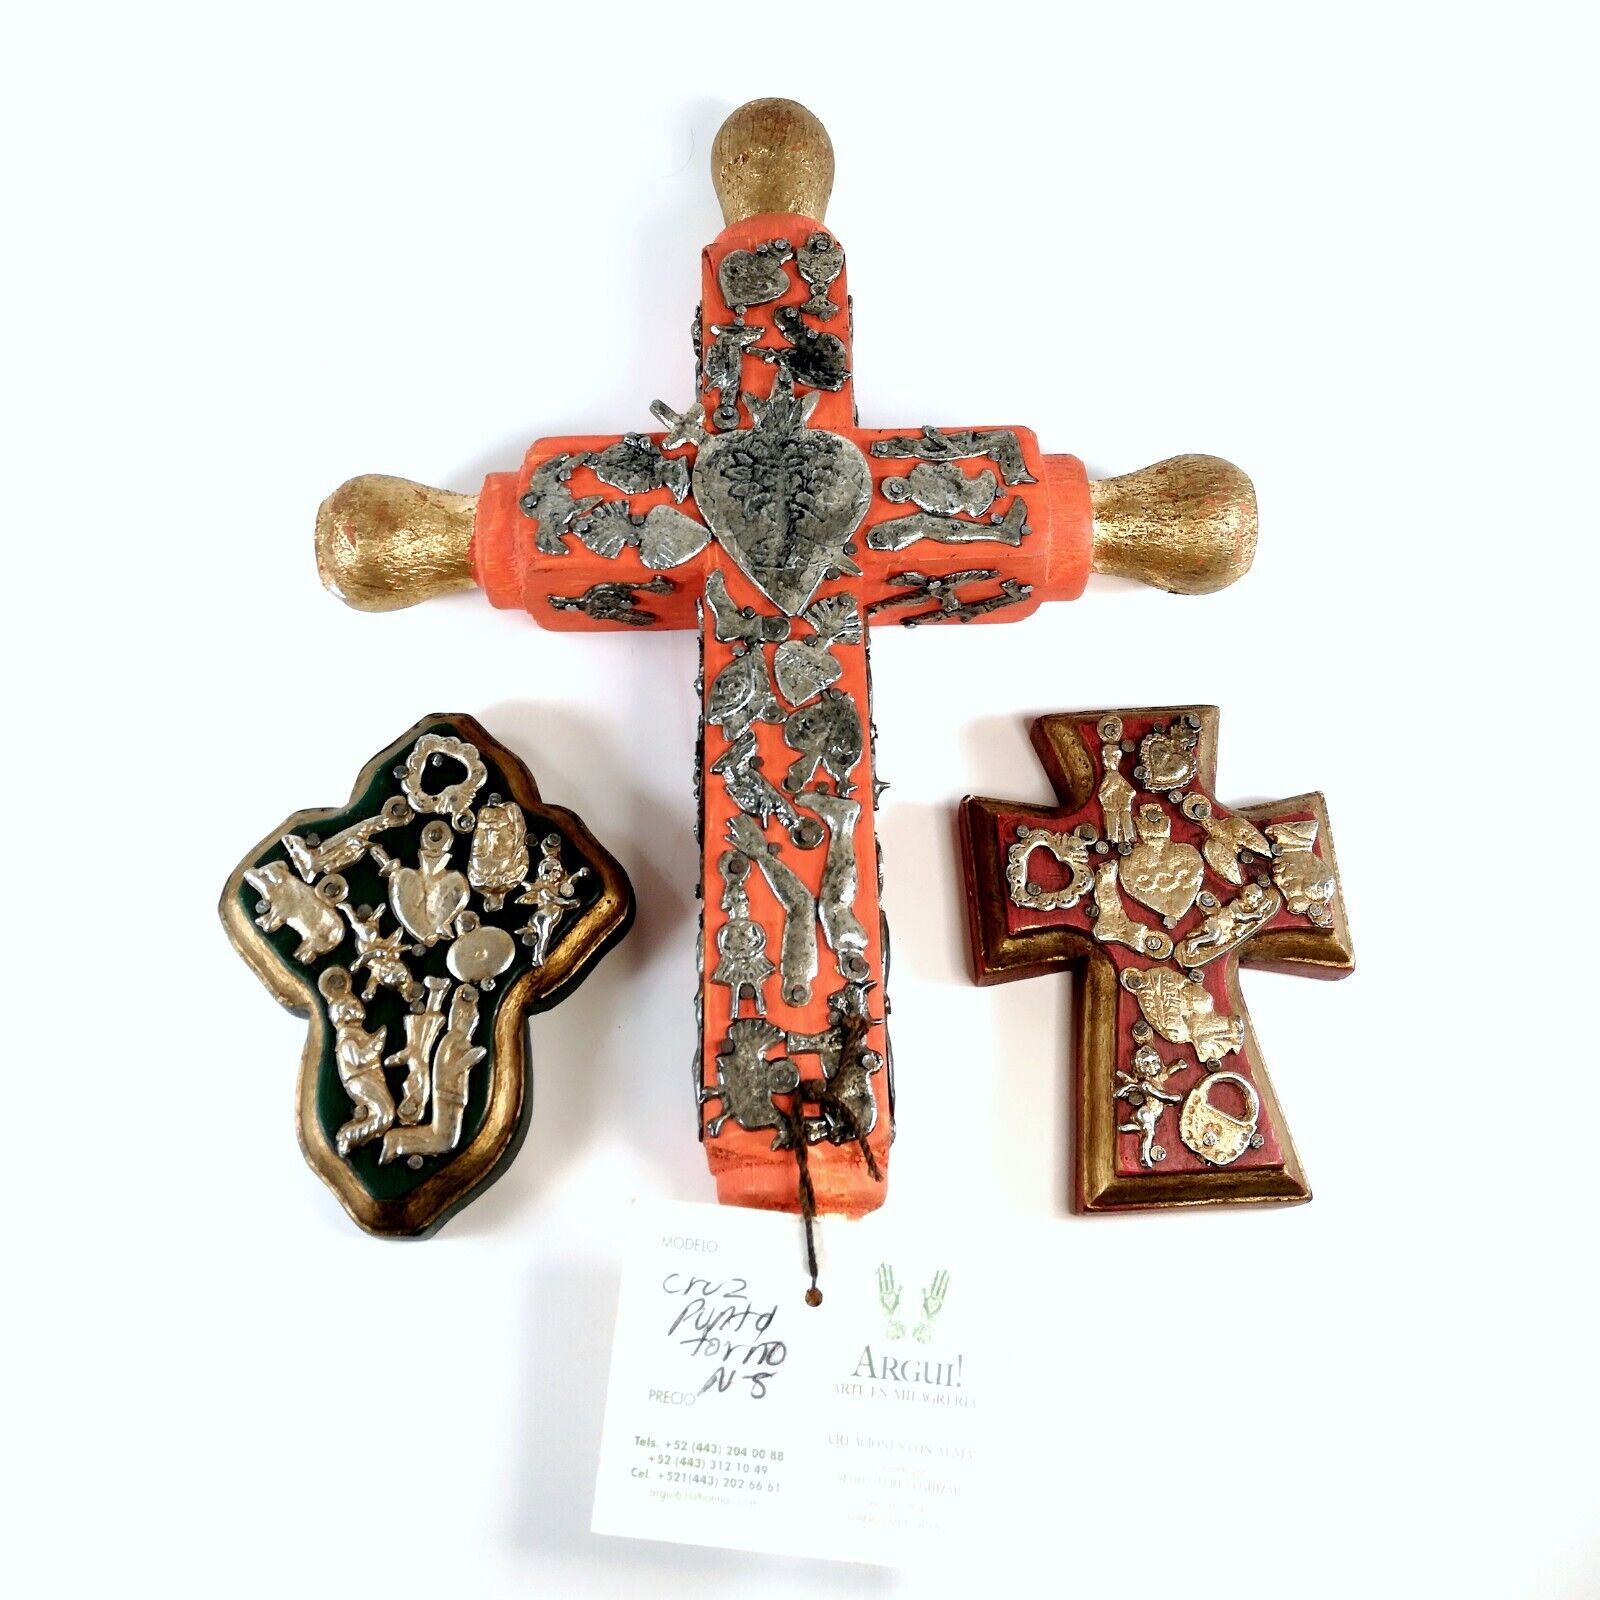 Lot of 3 Handmade Mexican Folk Art Milagro Covered Crosses Made in Mexico